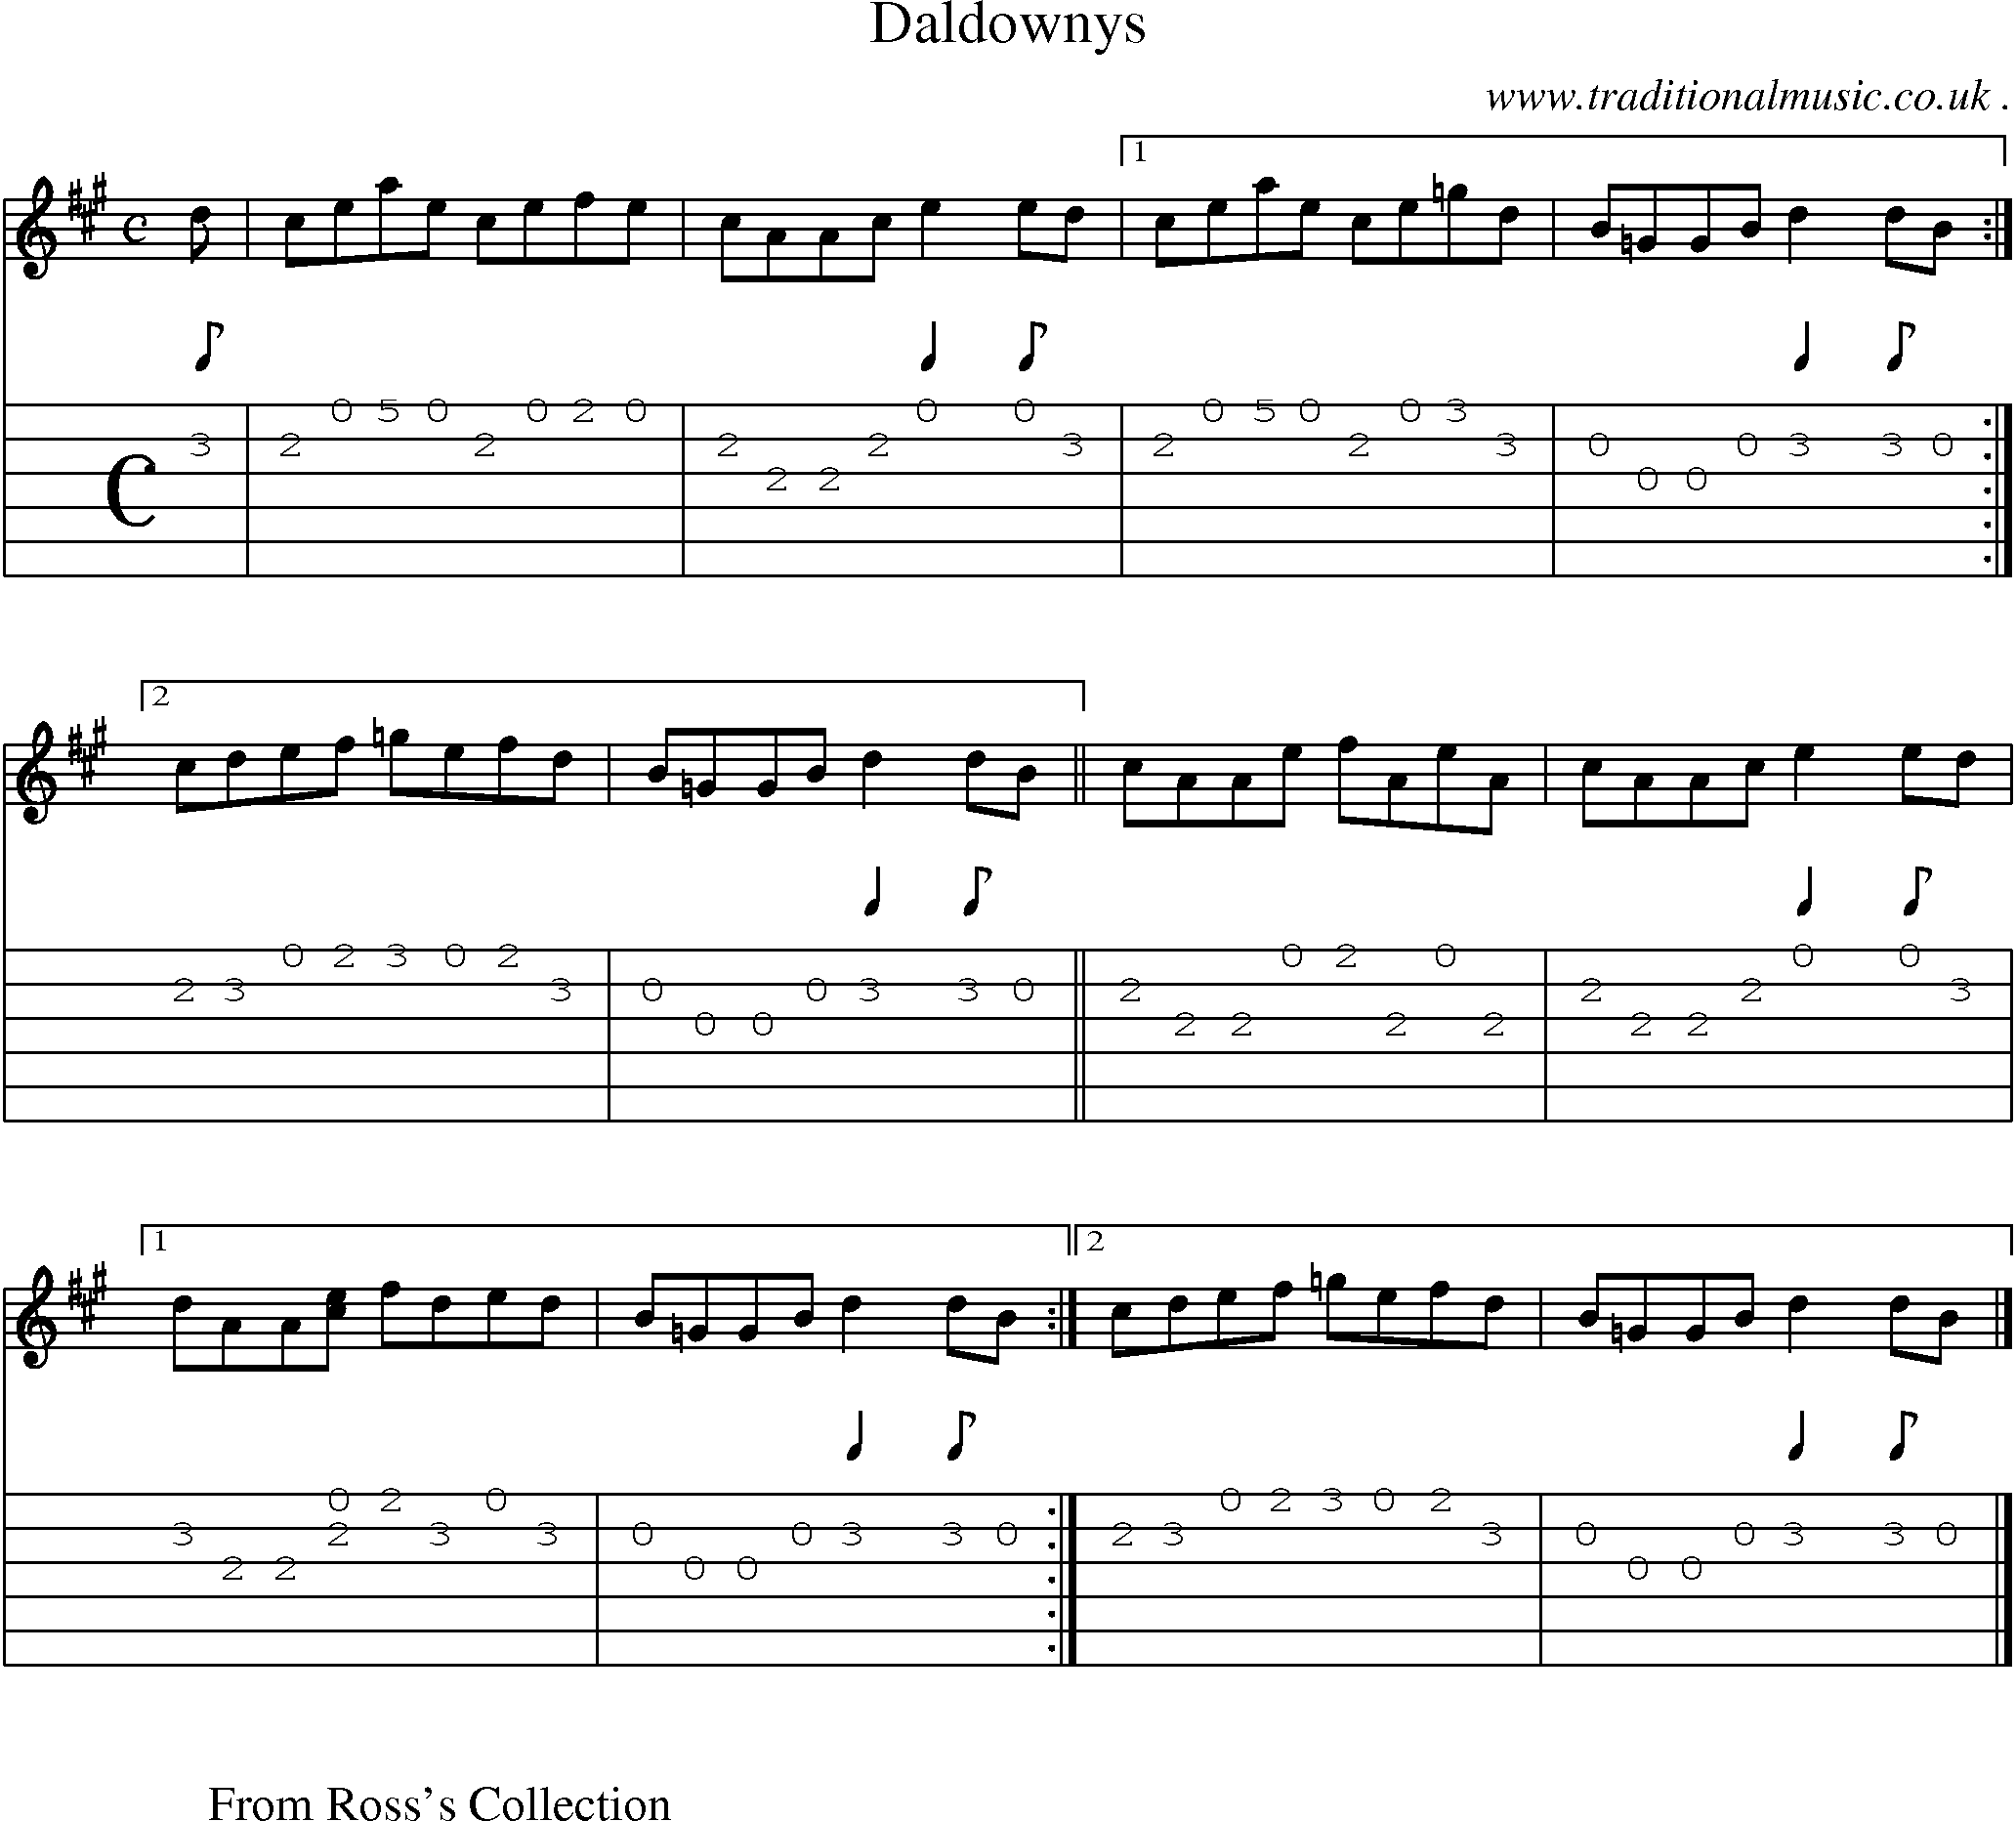 Sheet-music  score, Chords and Guitar Tabs for Daldownys